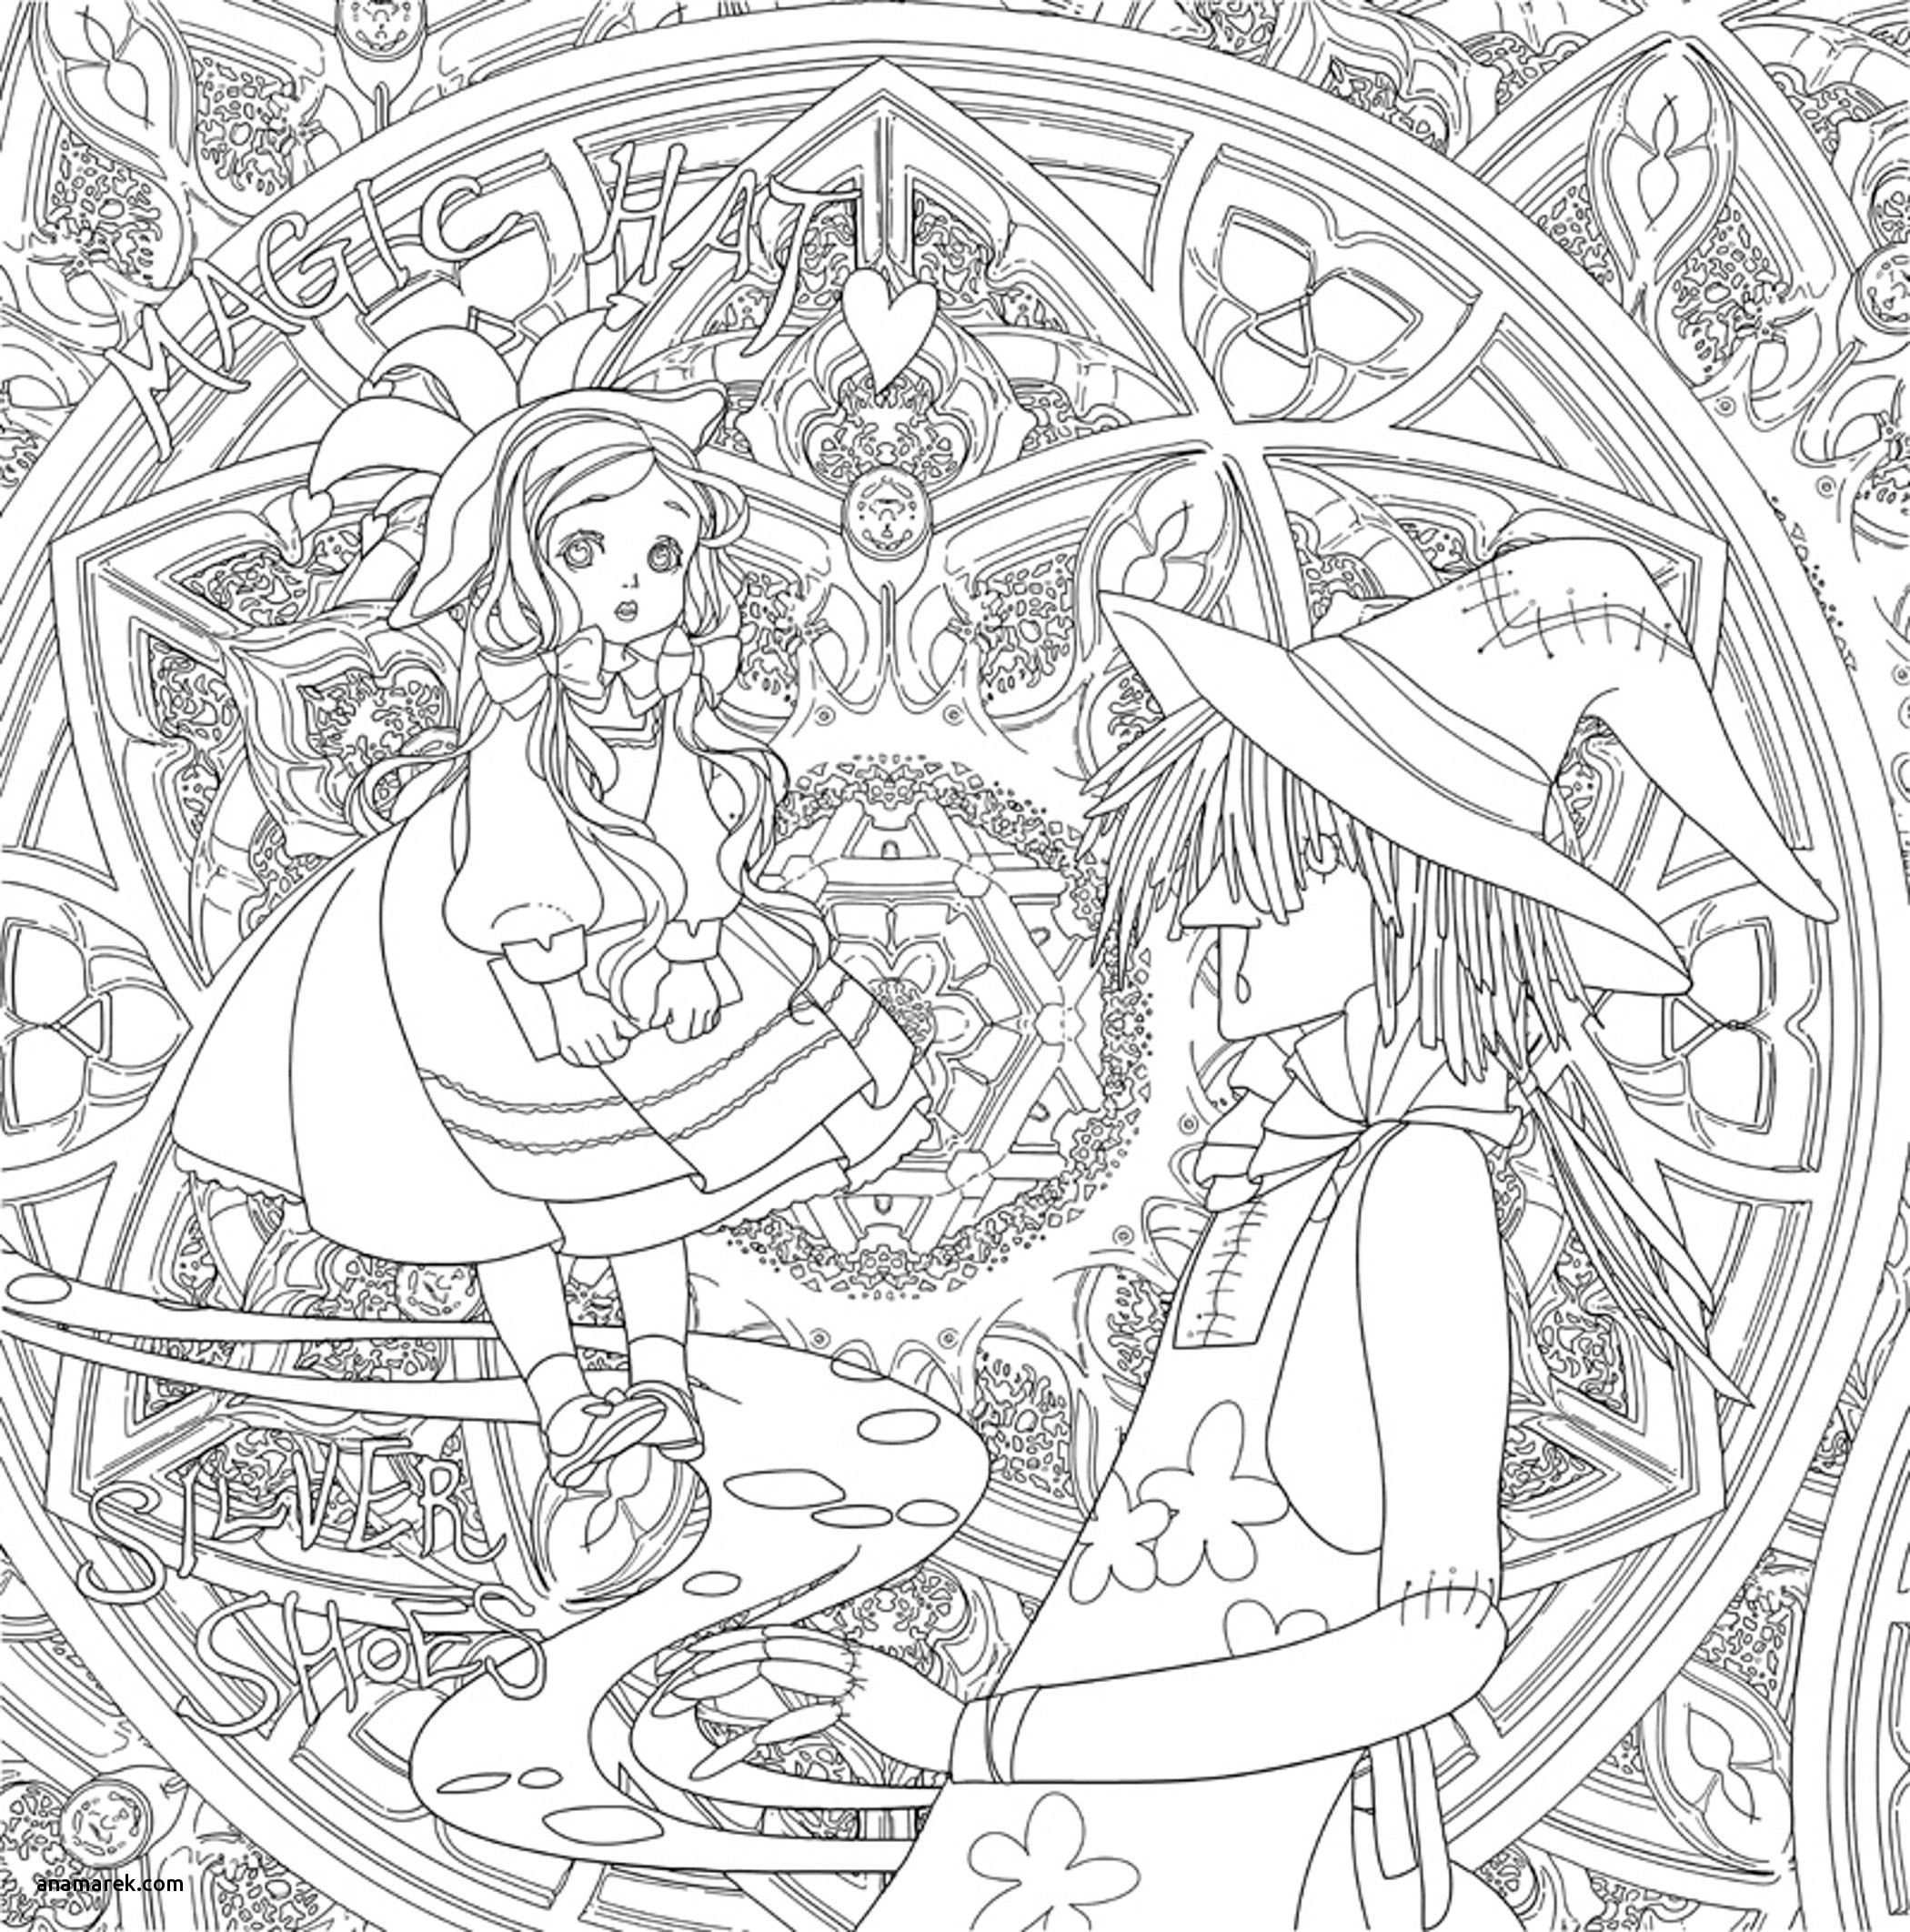 Coloring Books For Male Adults
 Adult Coloring Books For Men coloring page